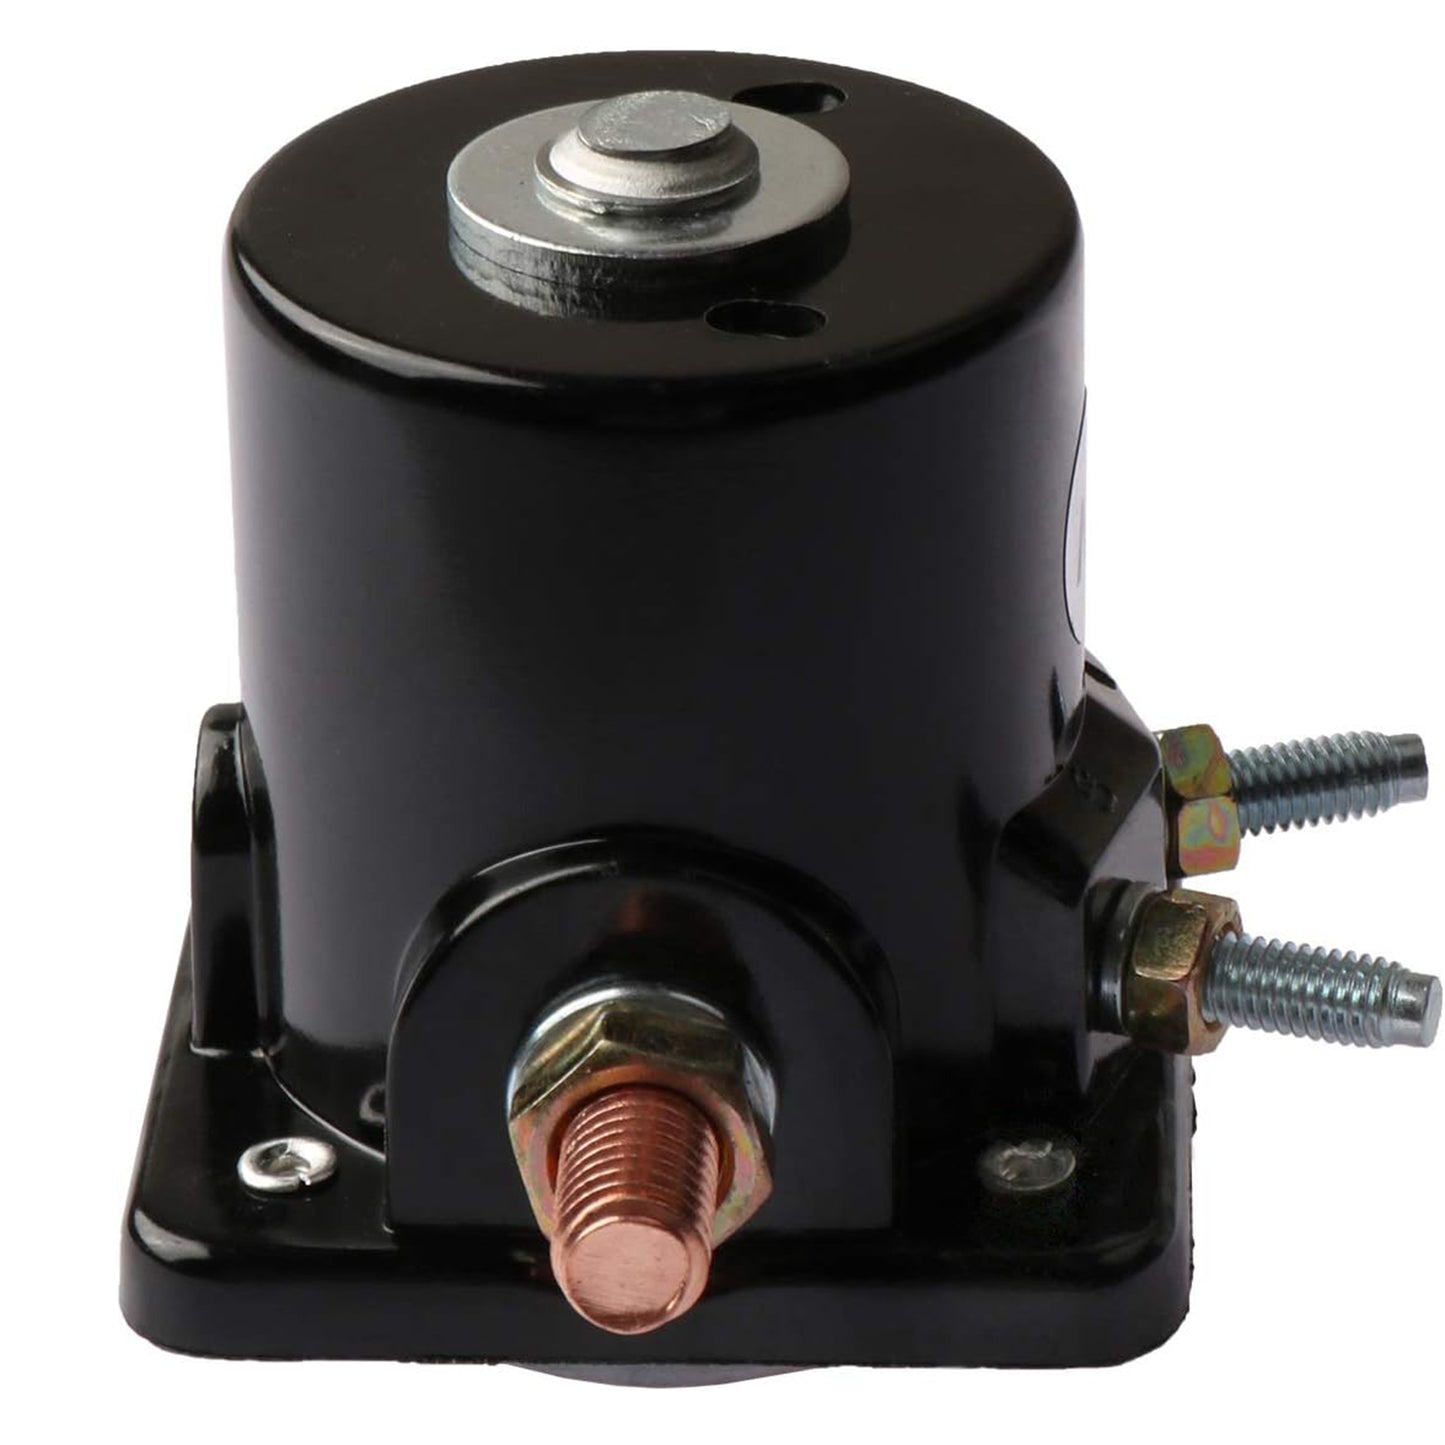 586180 Starter Solenoid 12V 4T Compatible with OMC Marine Johnson Evinrude Outboard